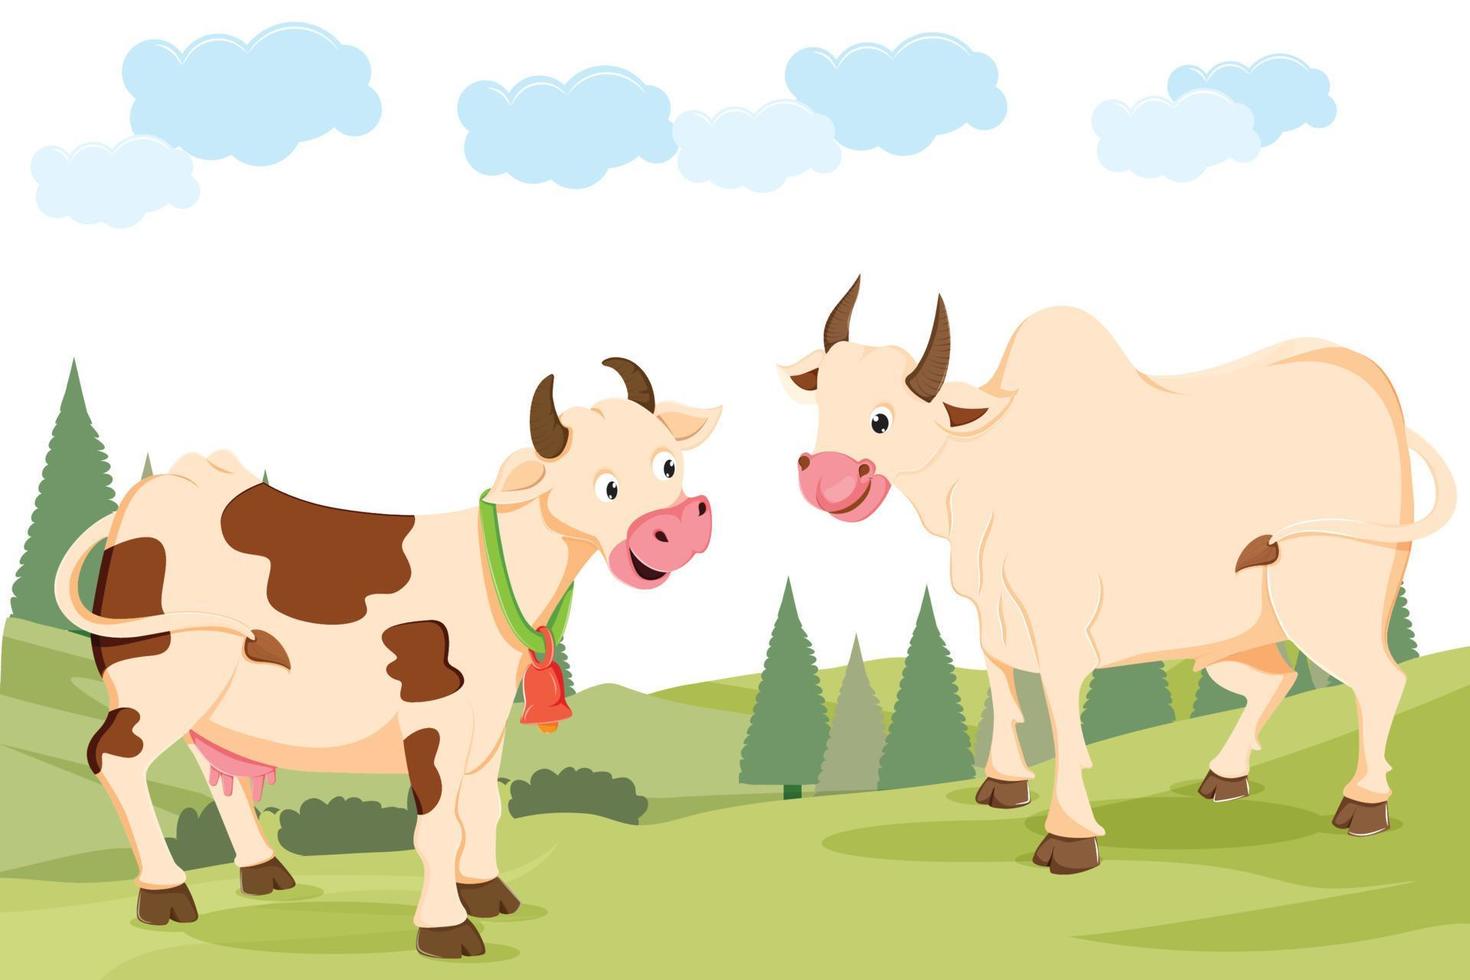 Talking Cute animal Cow and Ox vector